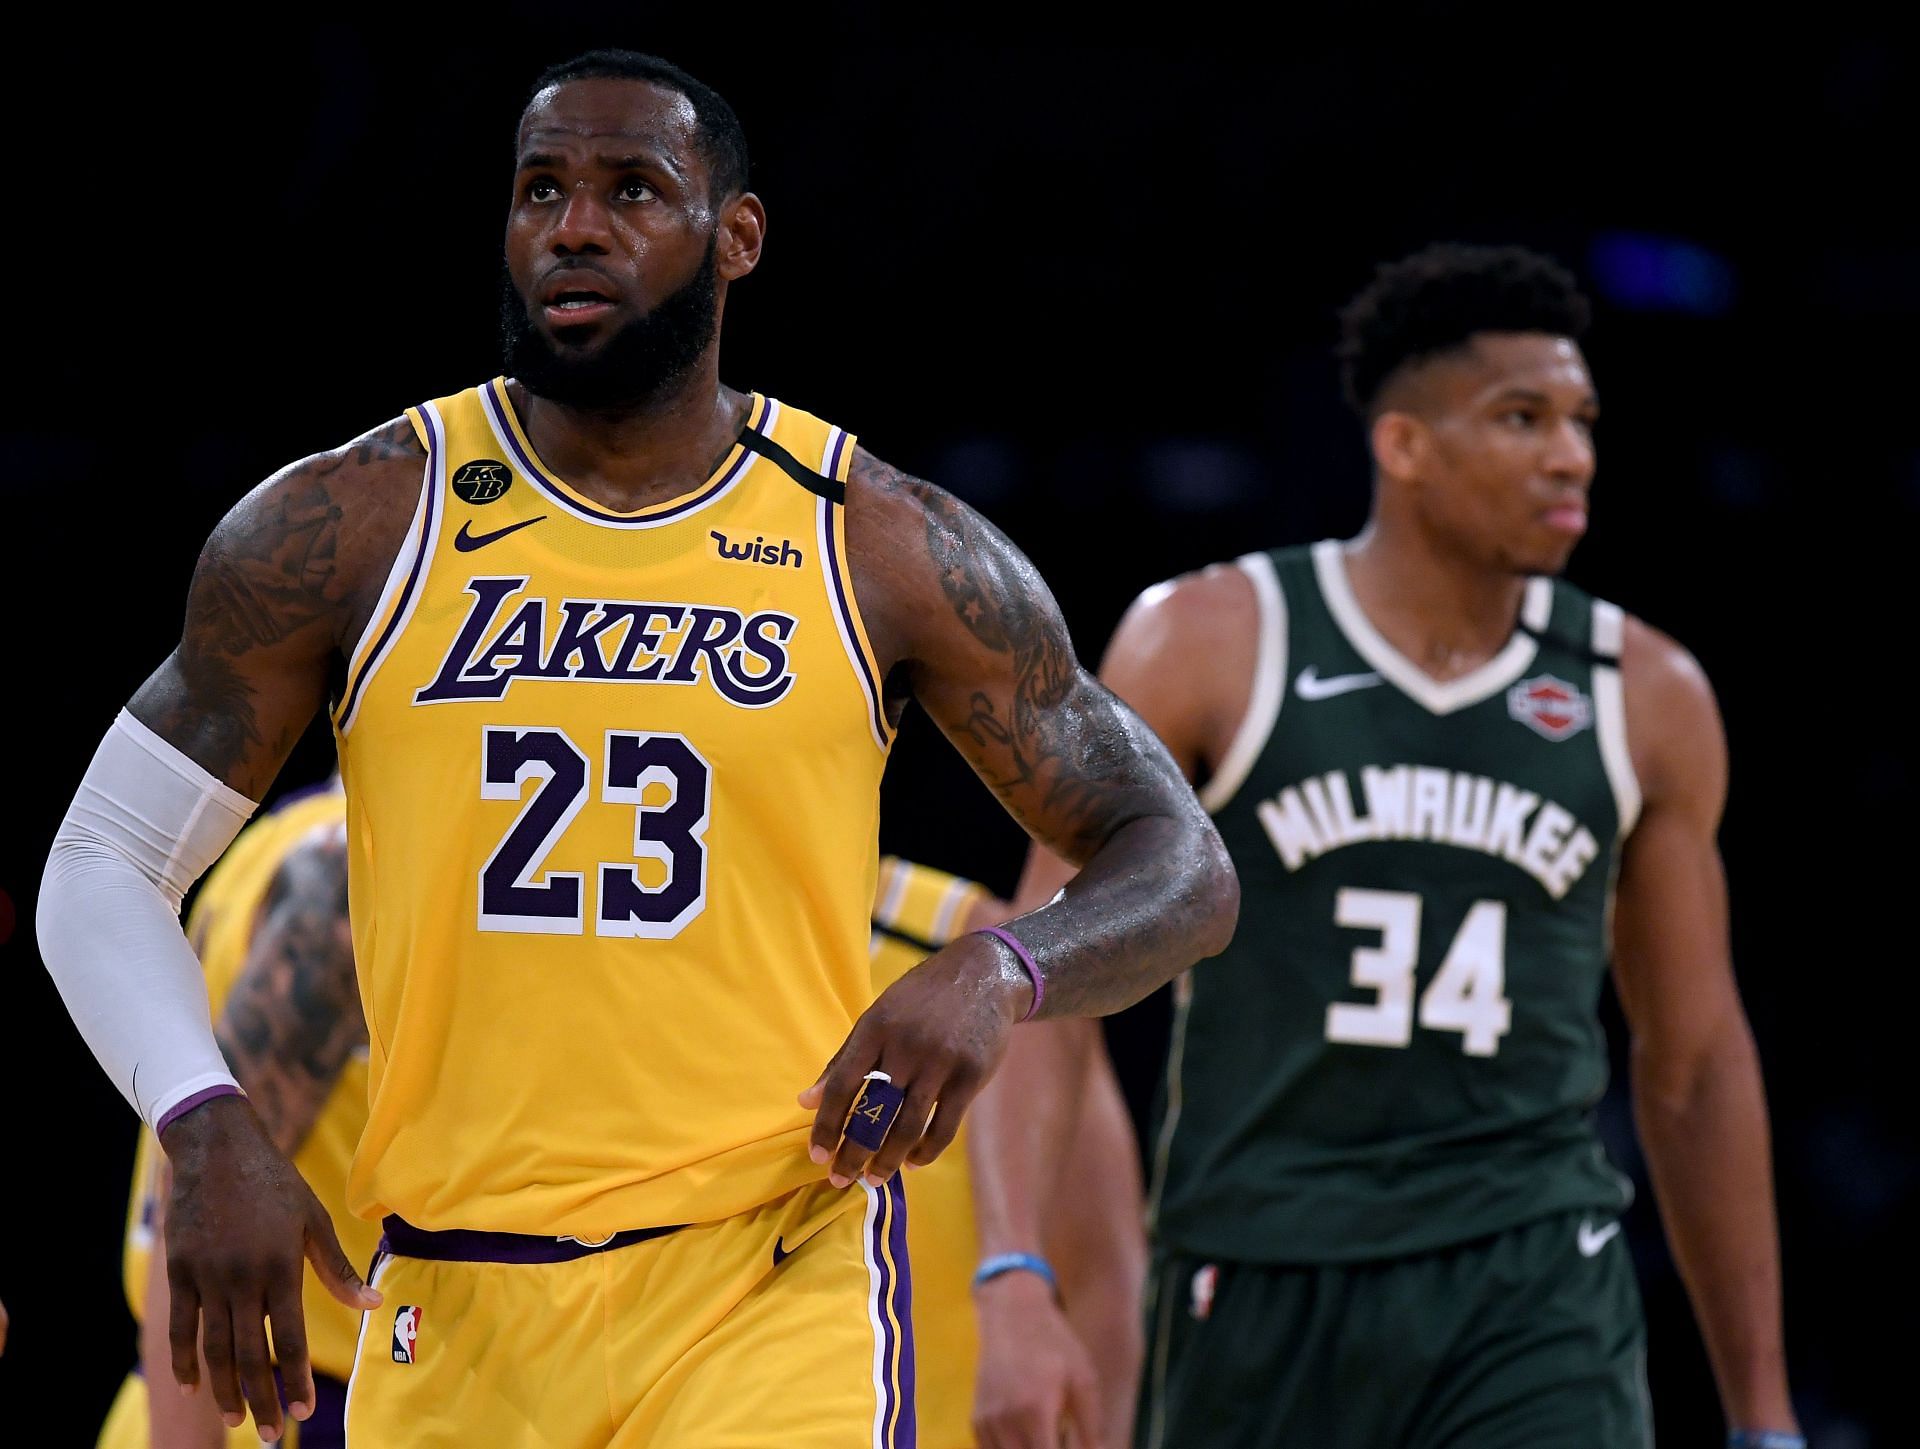 LeBron James will go up against Giannis Antetokounmpo in this game